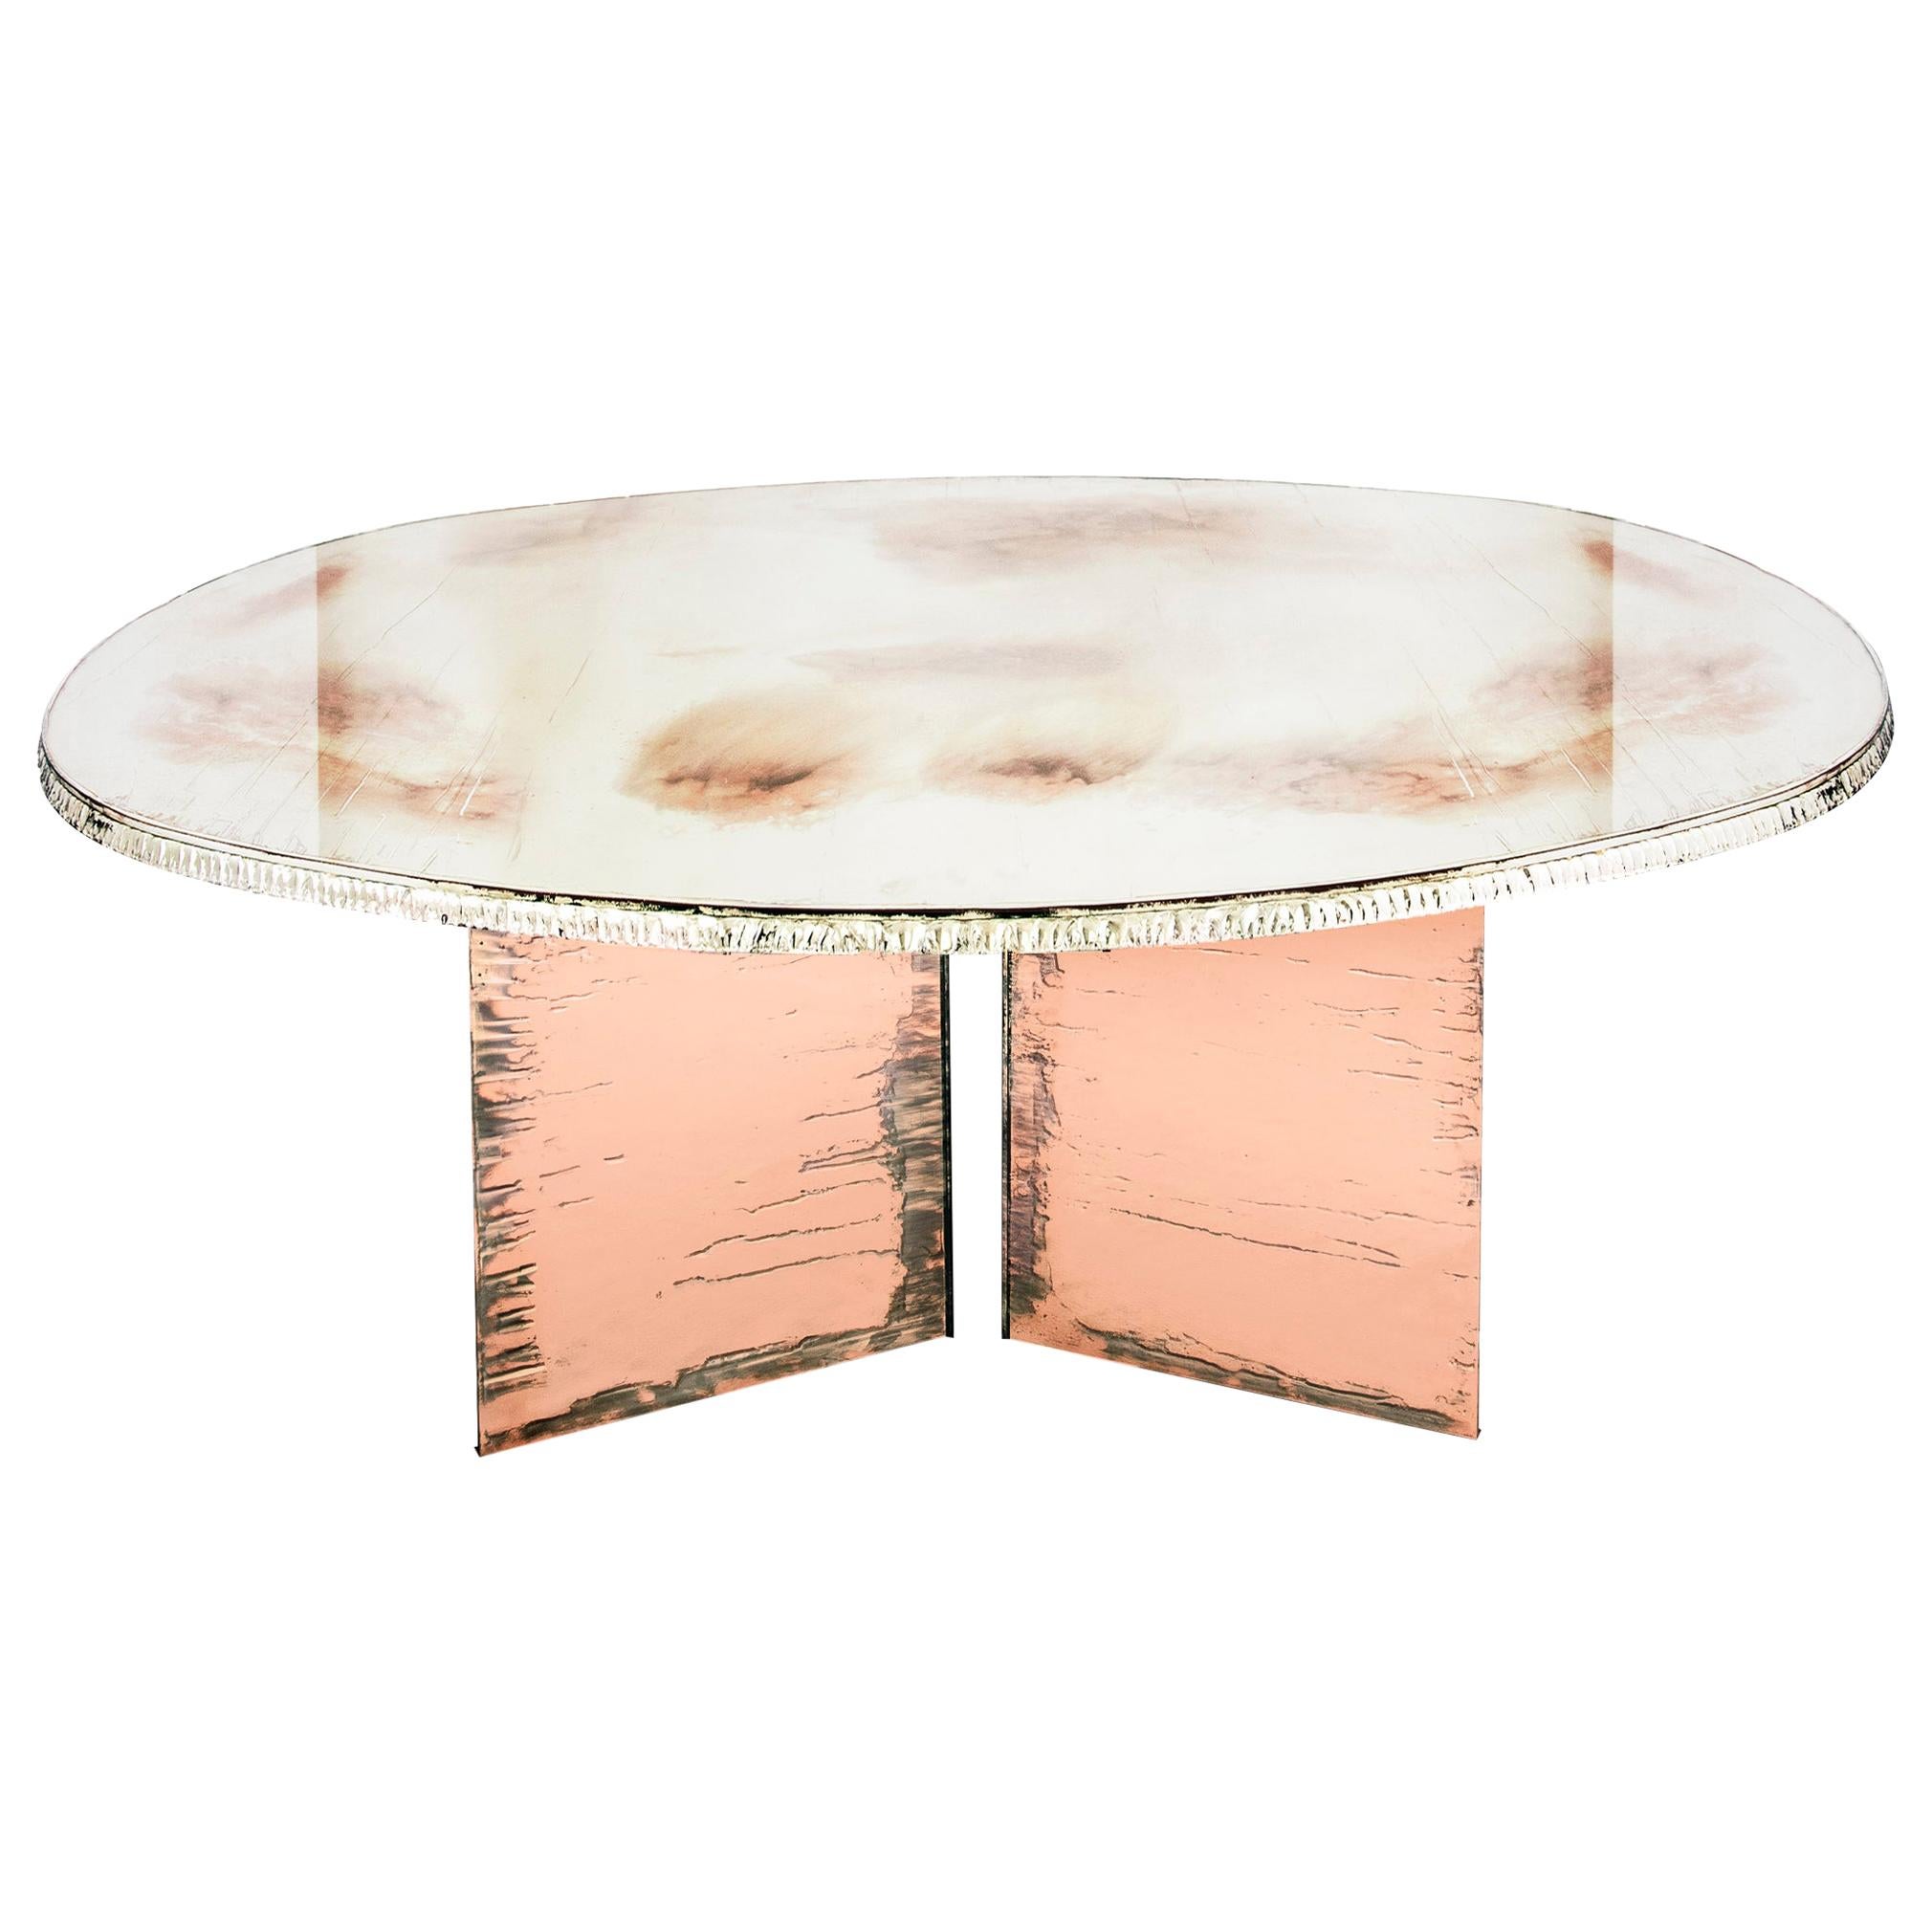 Flight Contemporary Low-Coffee Table, 120x80cm Rose Glass Legs, Silvered Glass